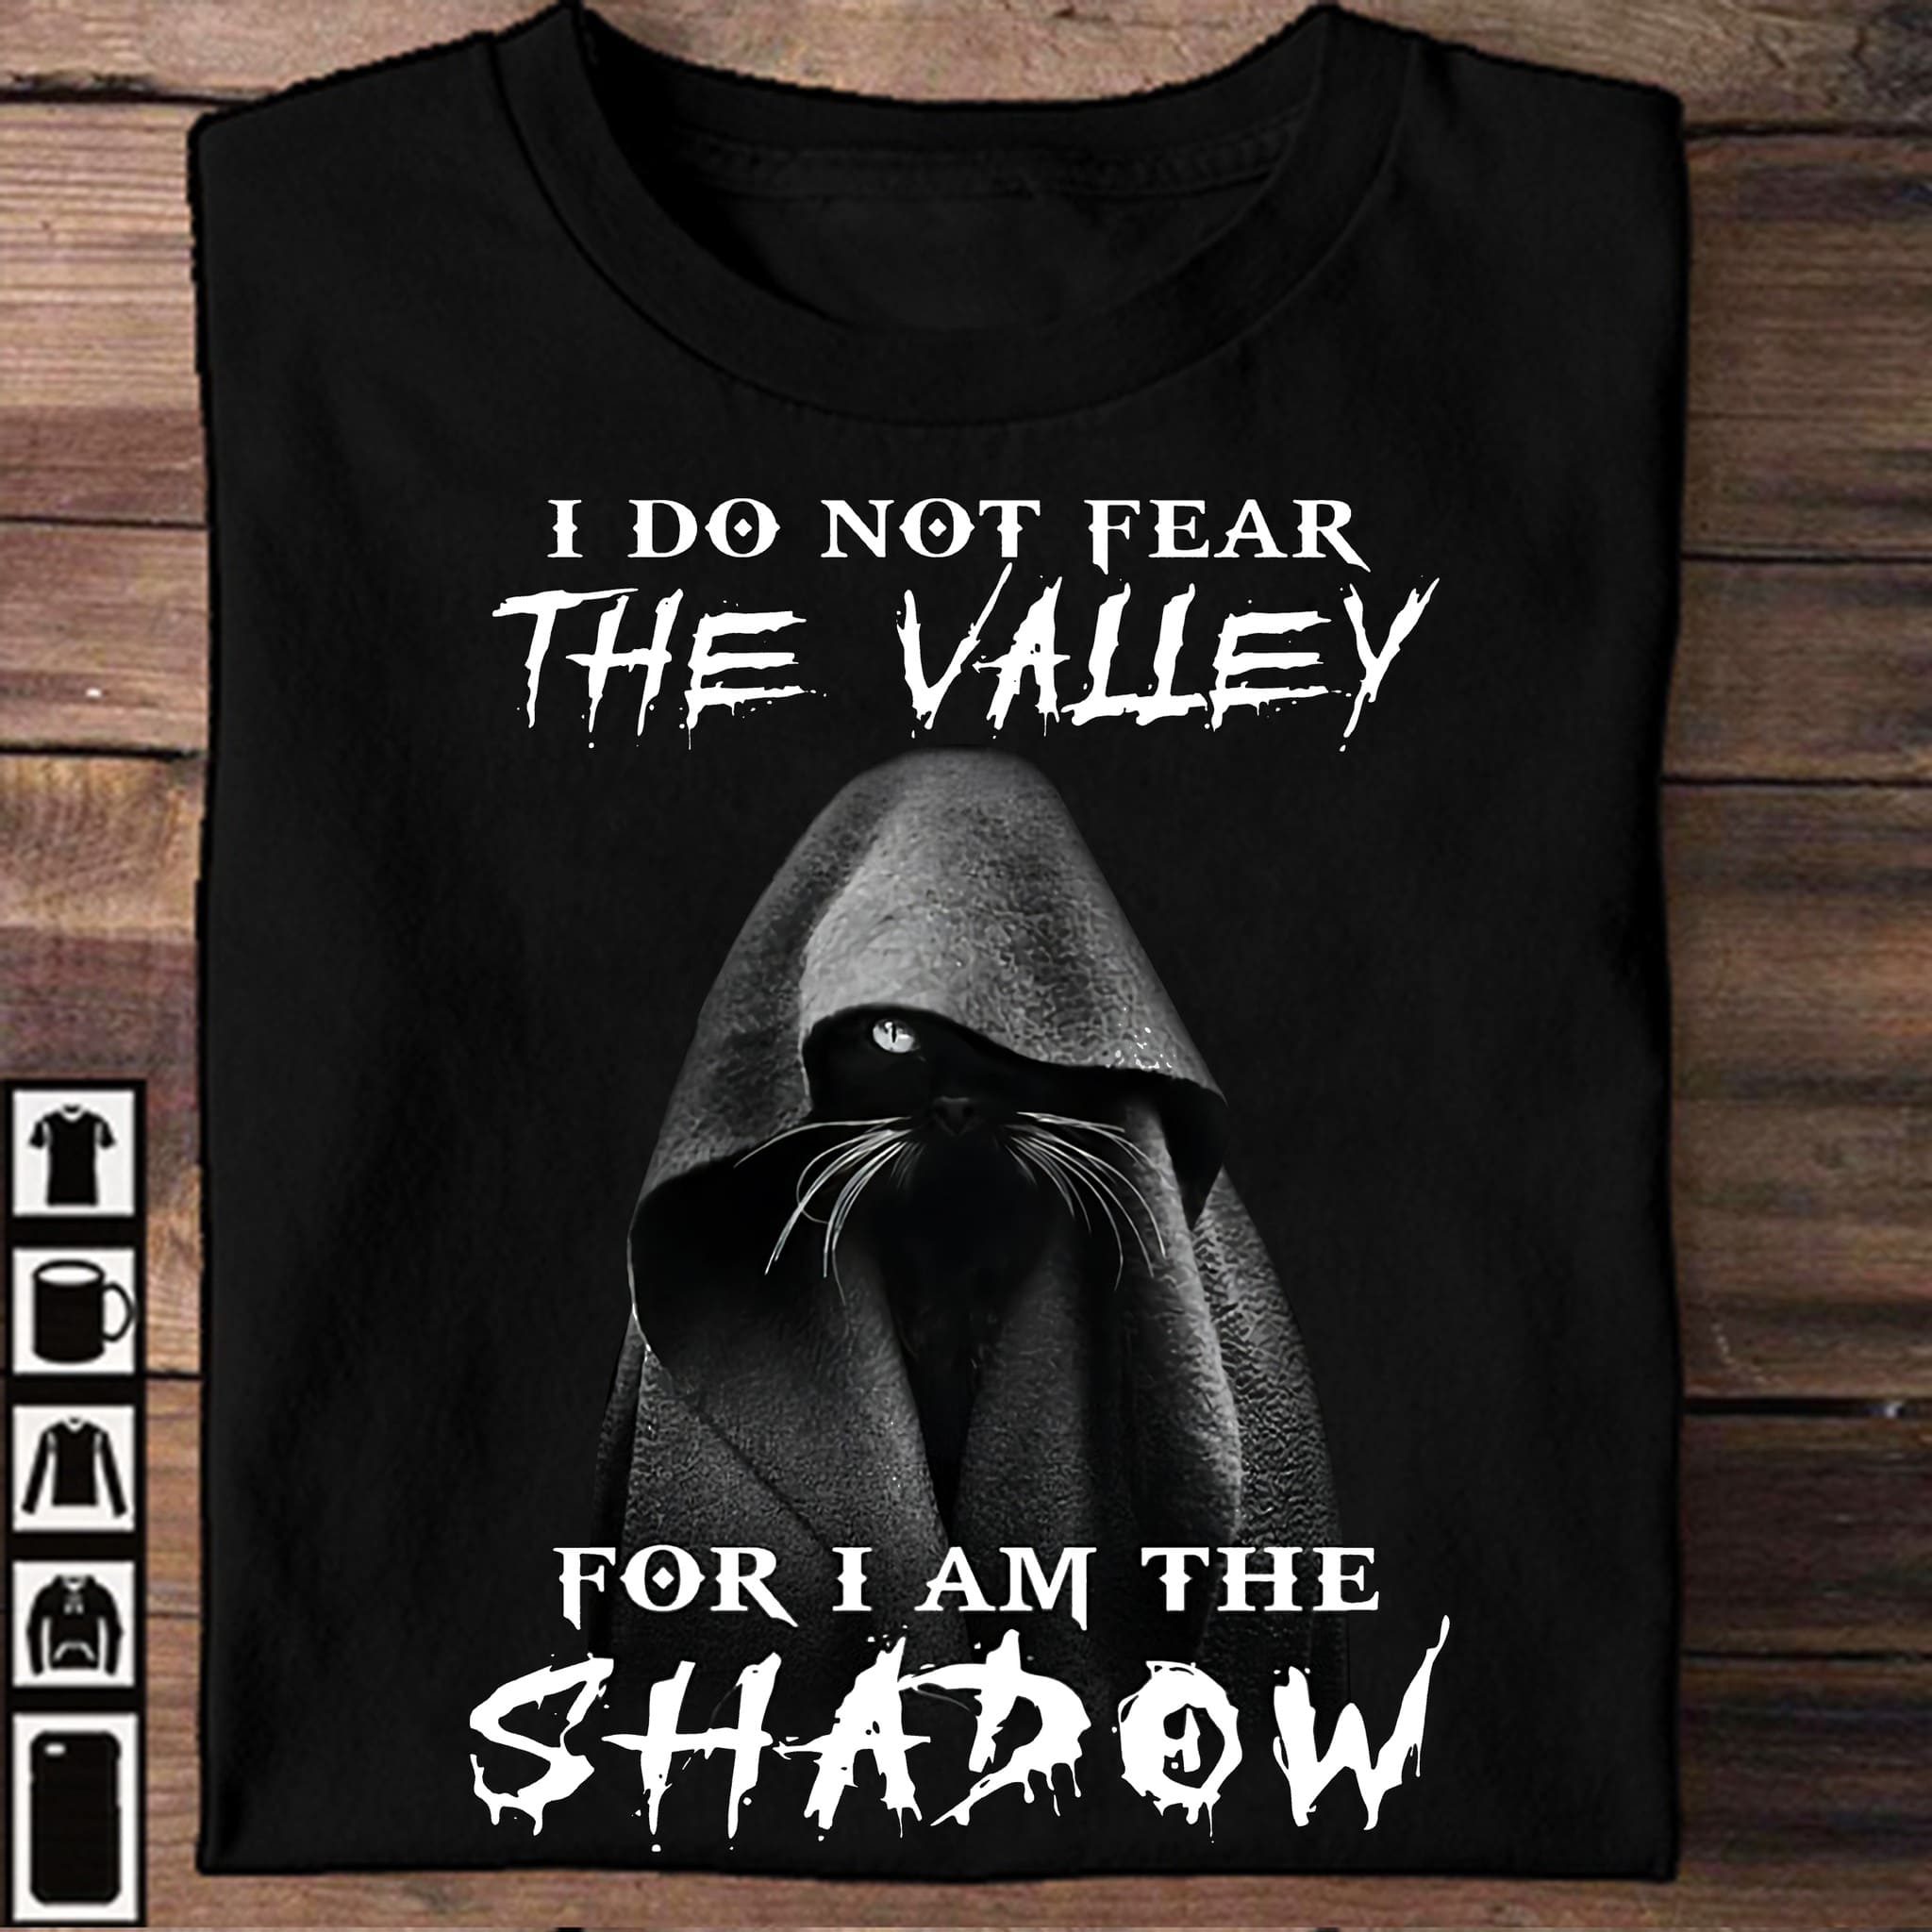 I do not fear the valley for I am the shadow - Secret black cat, black cat the shadow